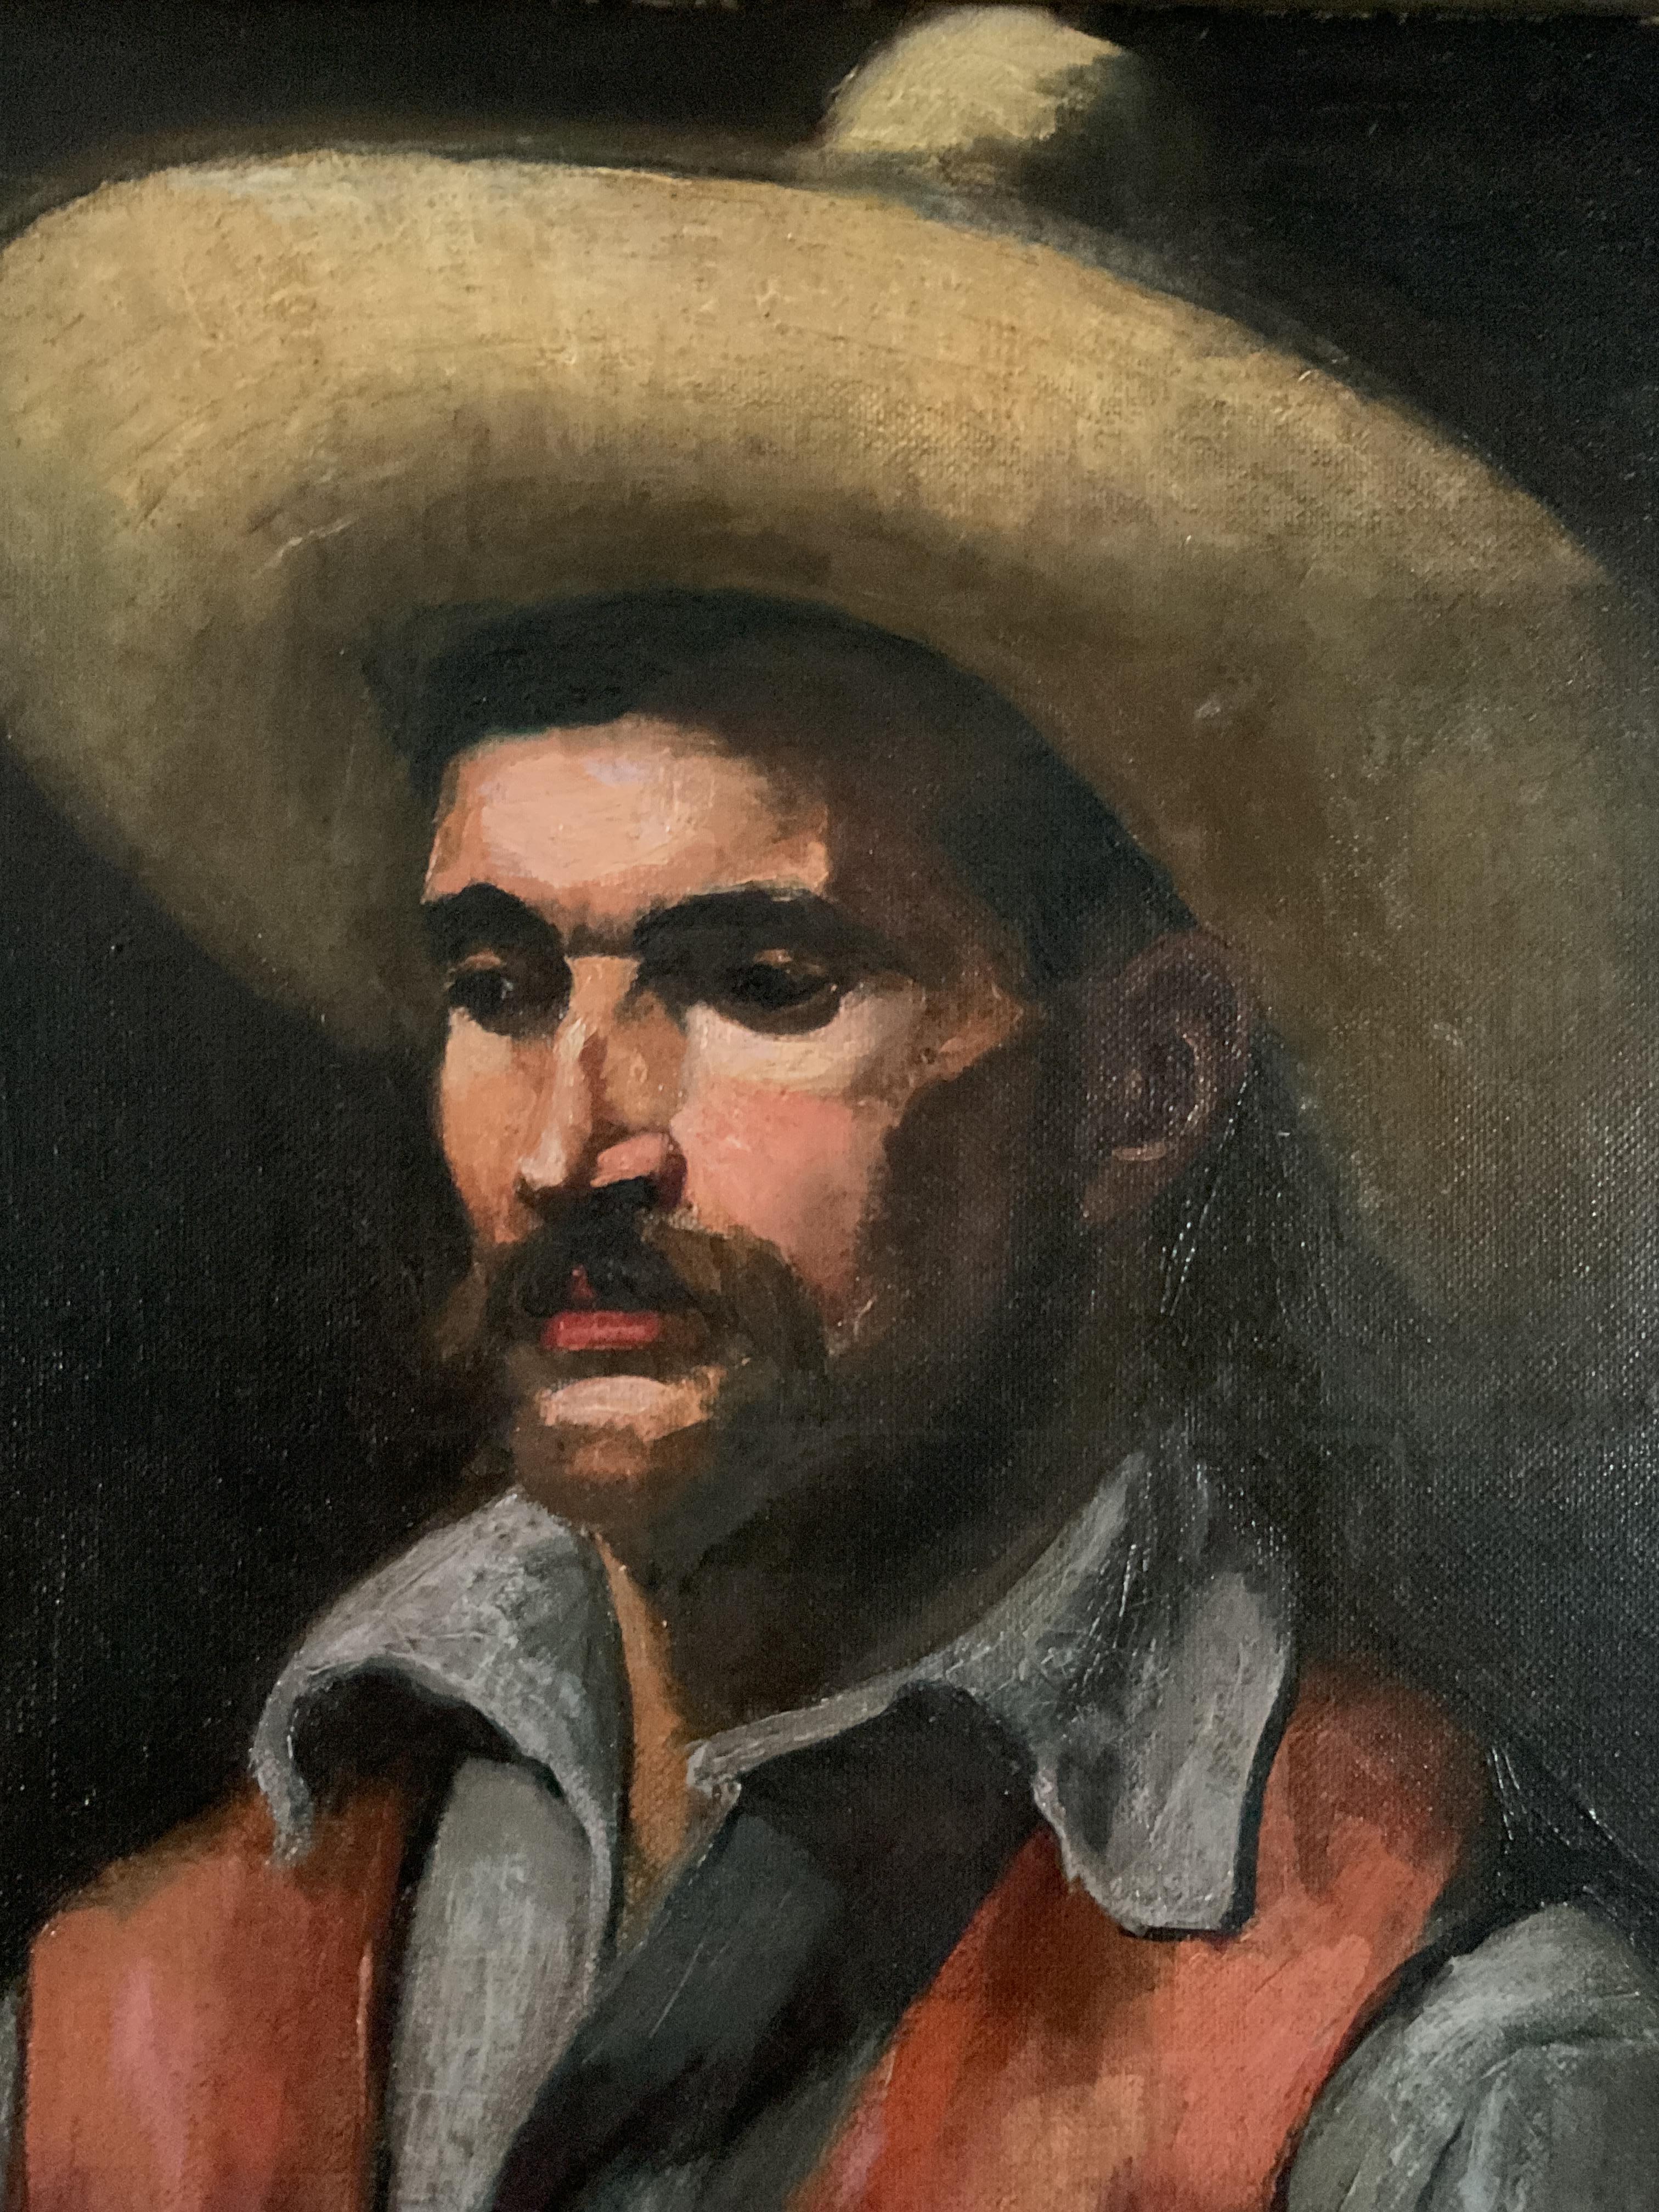 Antique Oil on Canvas Portrait of a Handsome Gaucho or Cowboy, American ca 1920 - Post-Impressionist Painting by Unknown